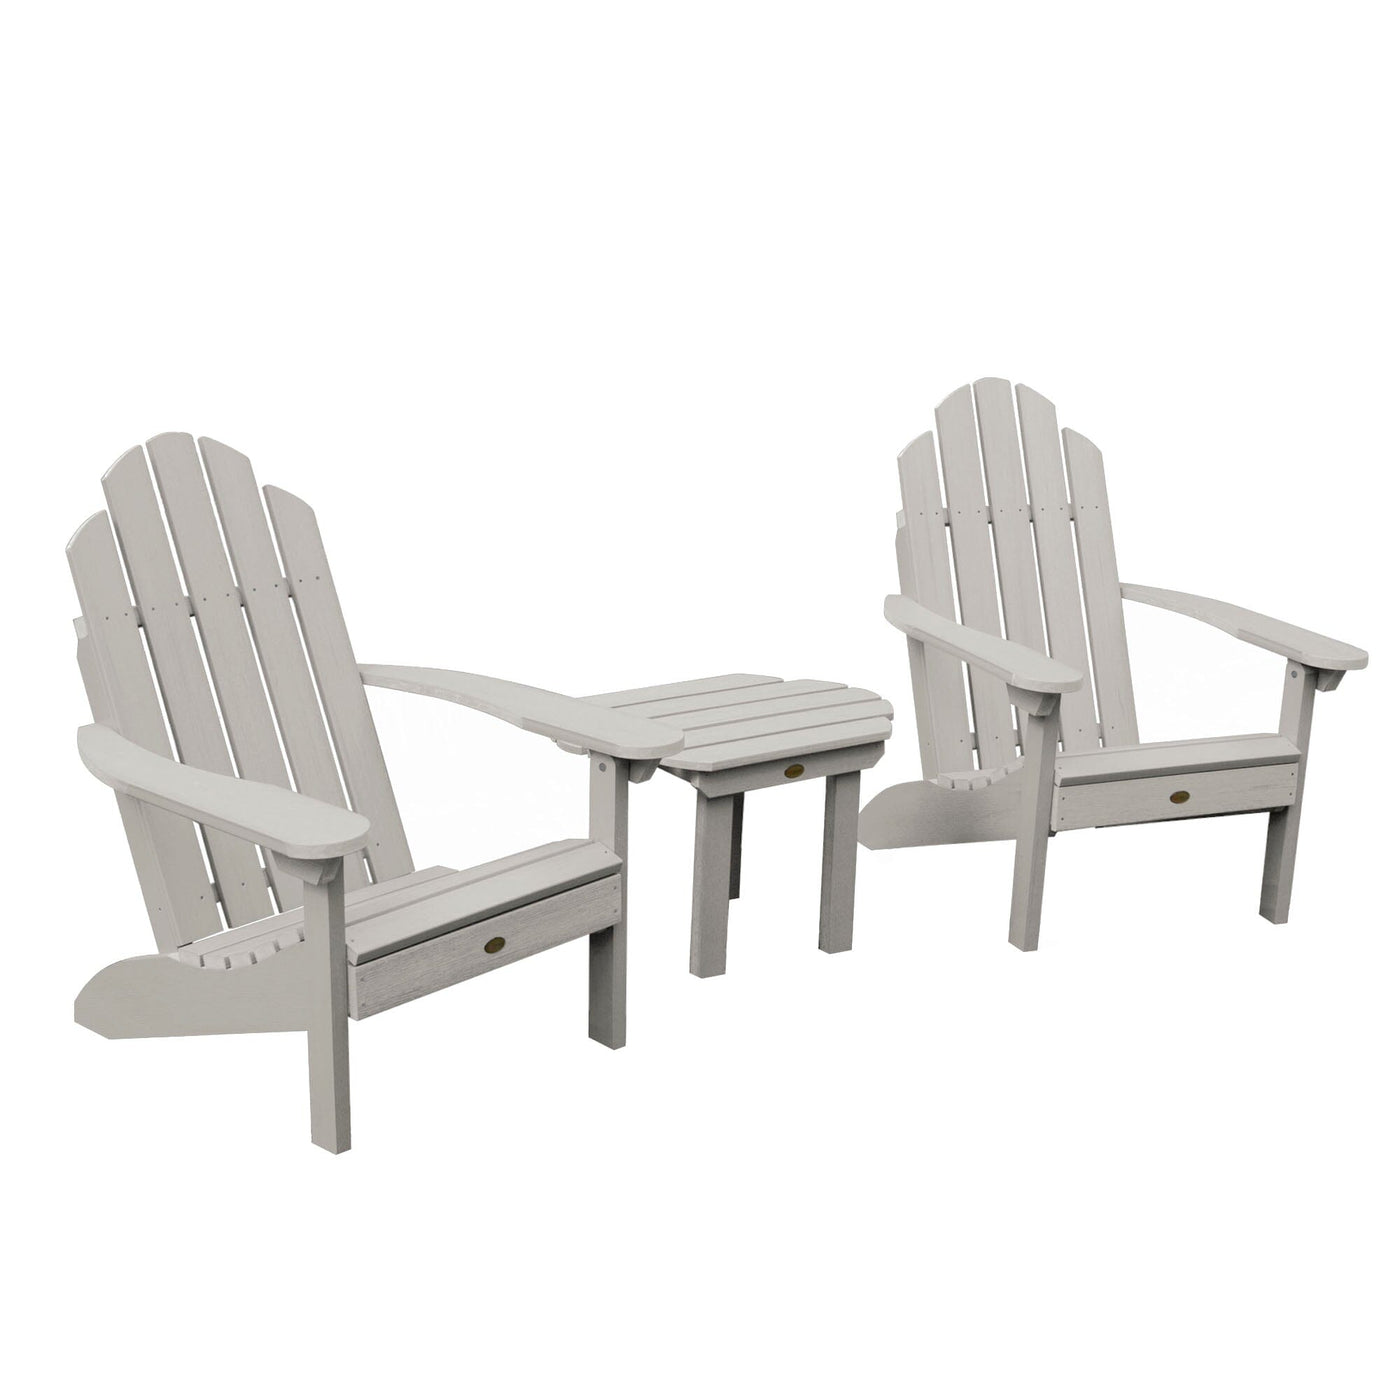 2 Classic Westport Adirondack Chairs with Westport Side Table Kitted Sets Highwood USA Harbor Gray 